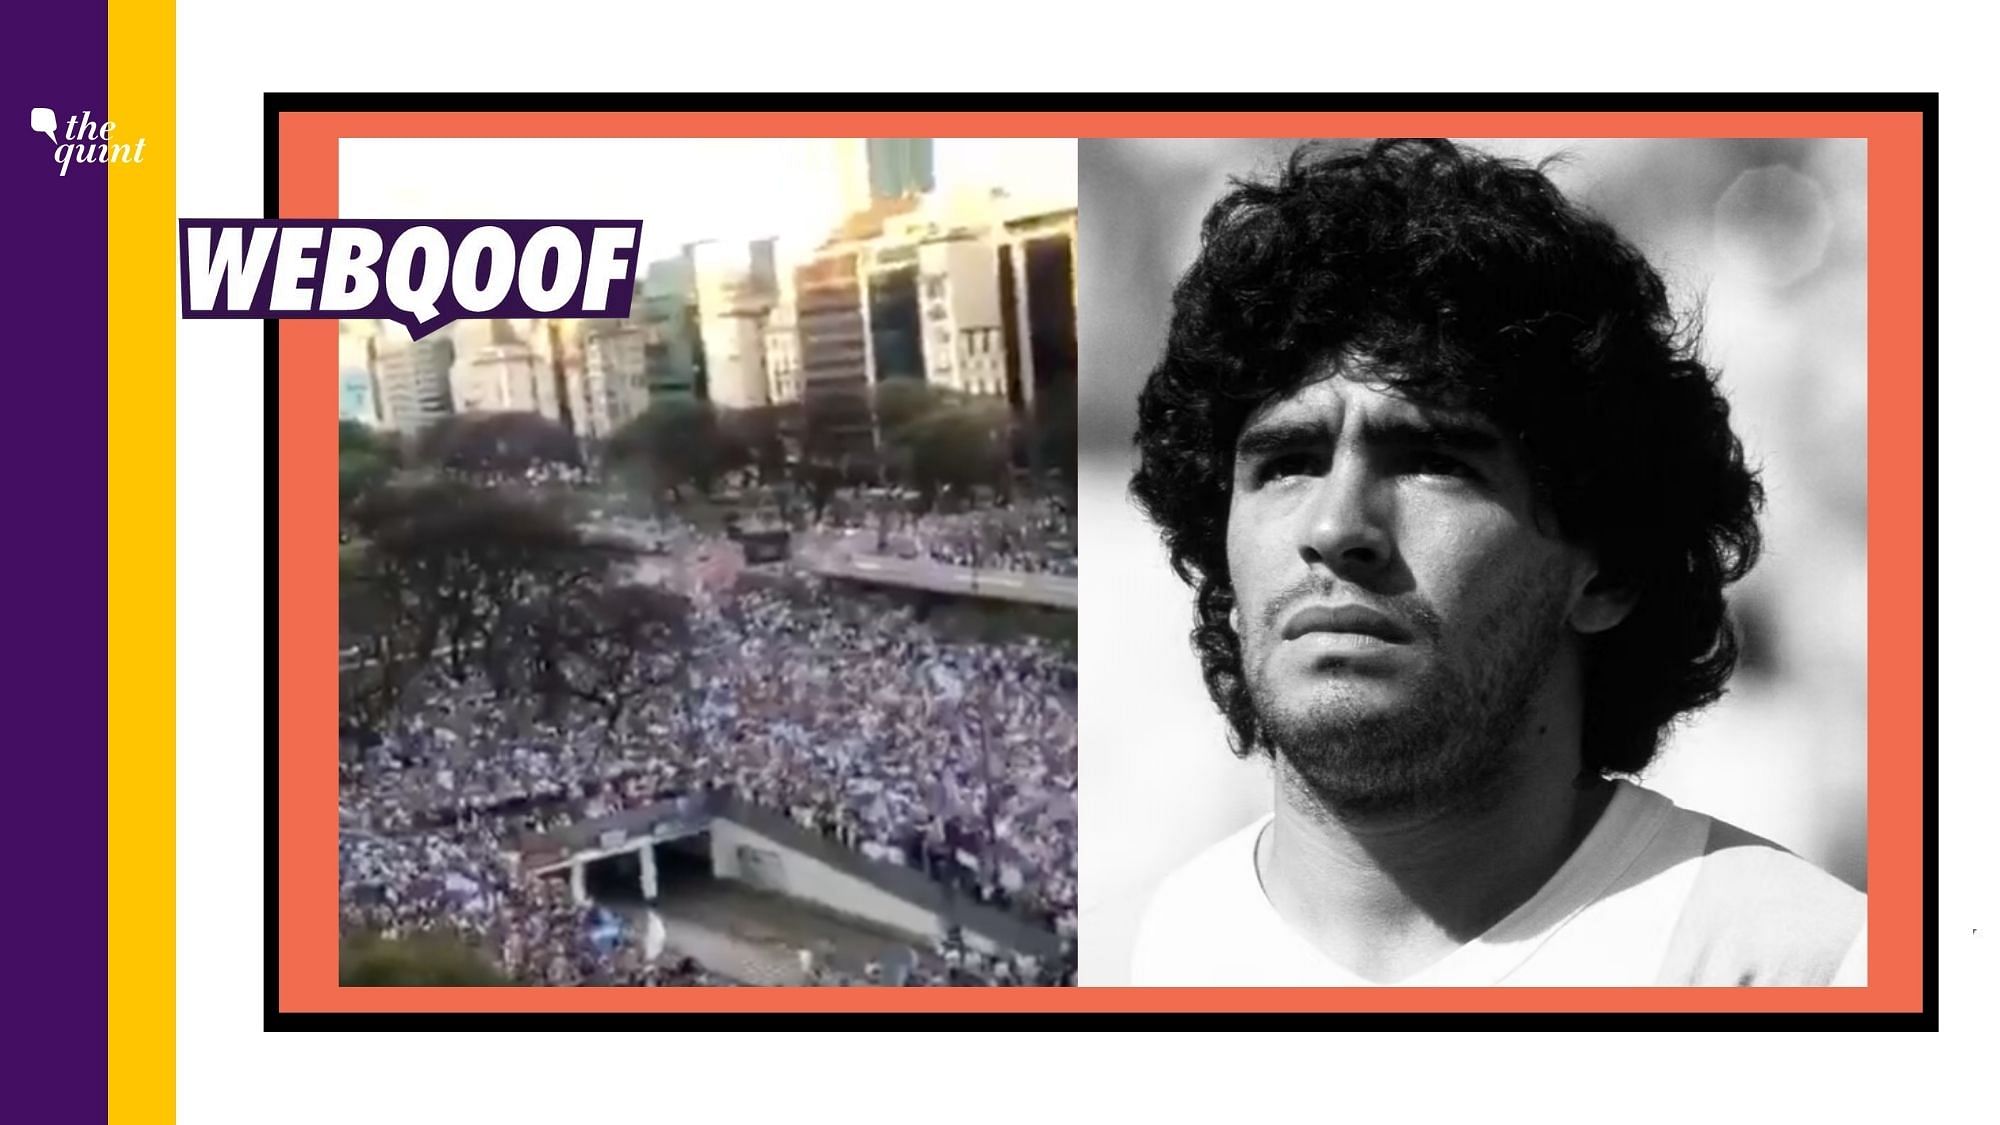 An old video from Argentina is being circulated with the false claim that it shows the crowd gathered for Maradona’s funeral ceremony.